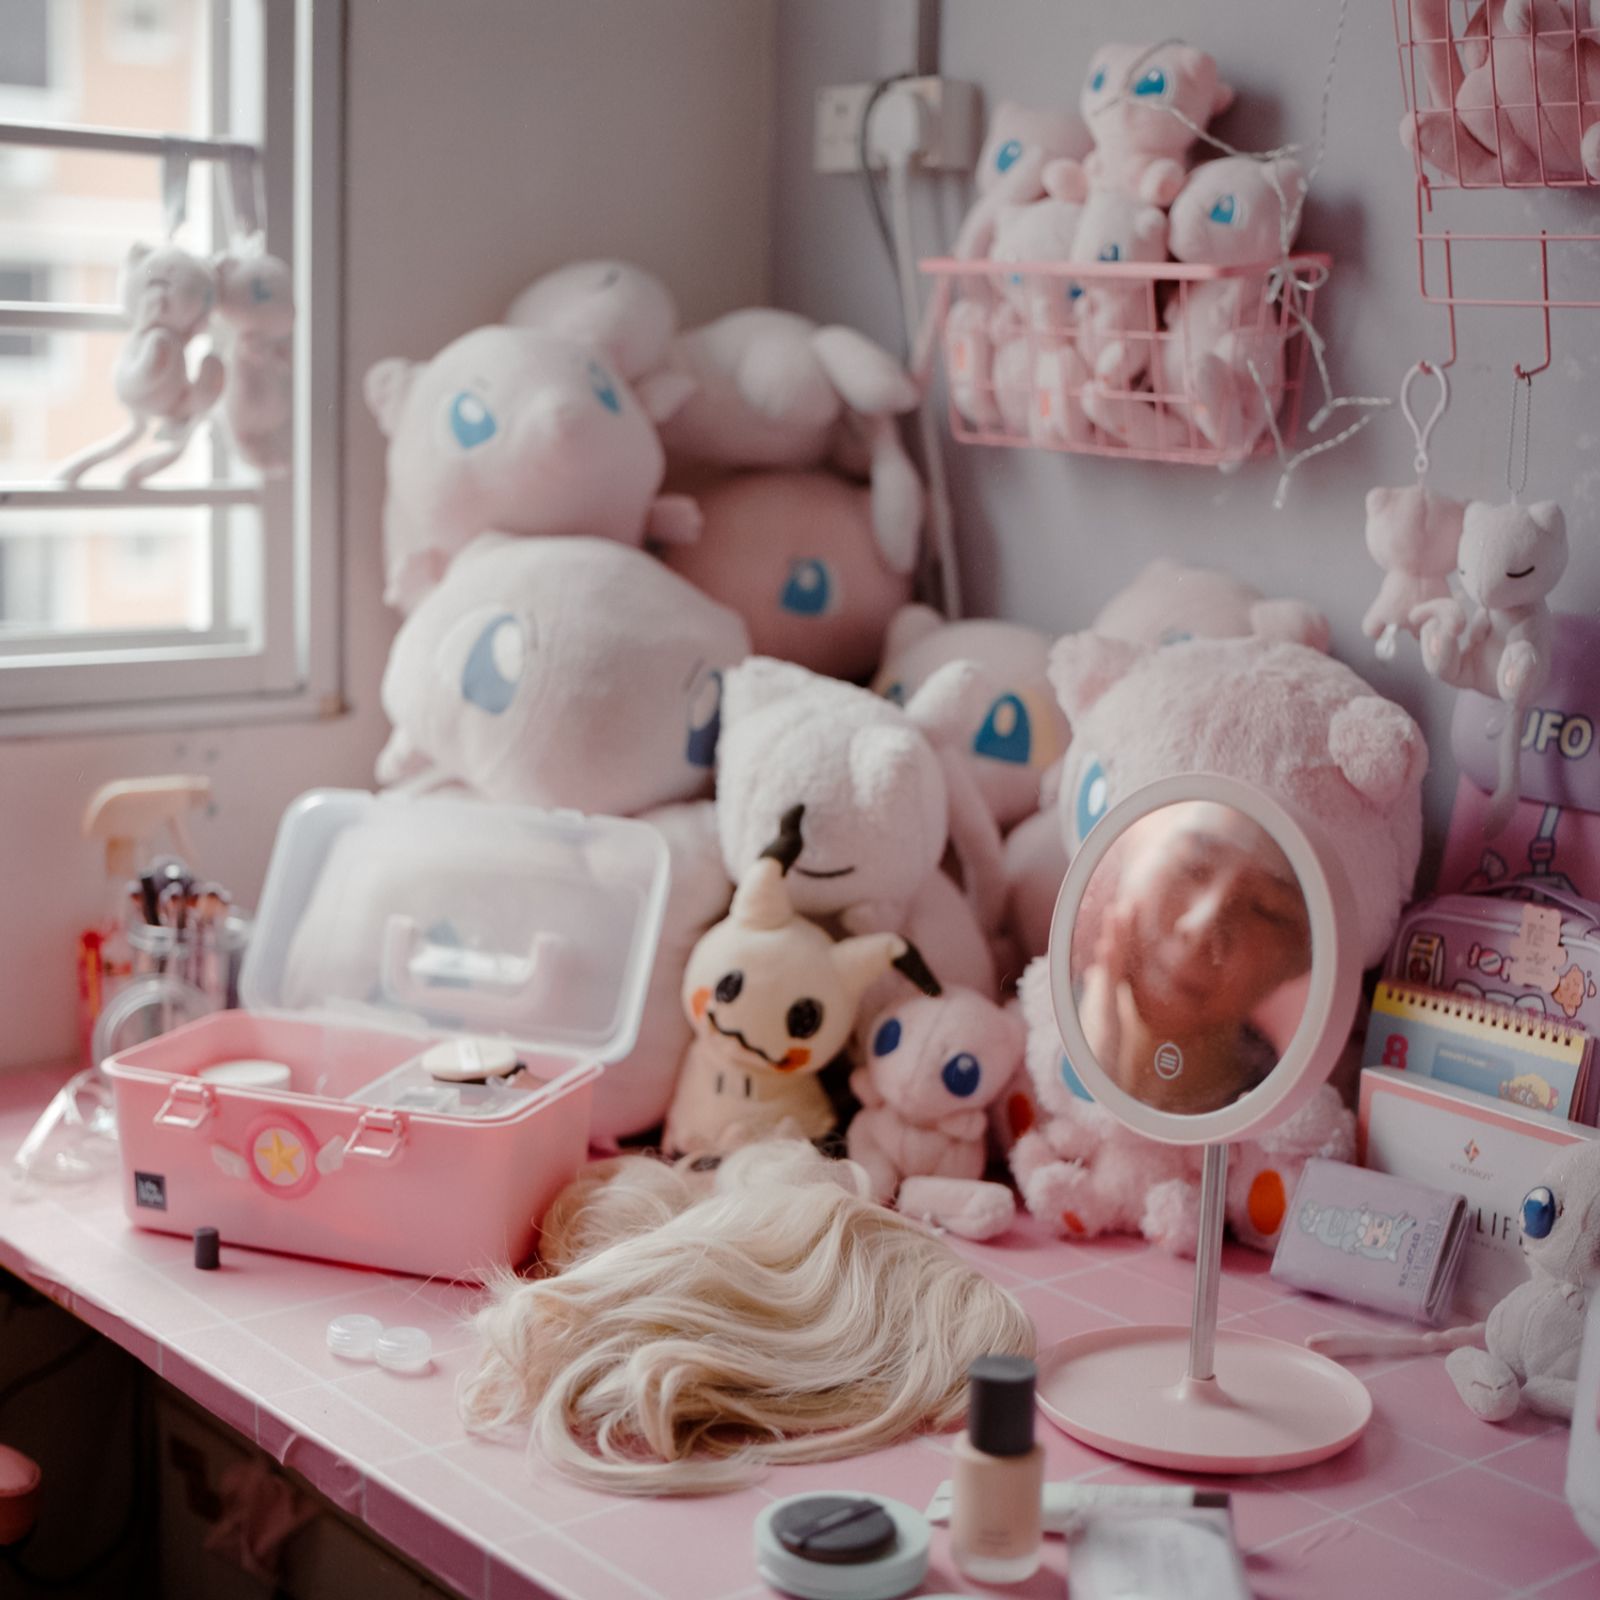 © Alvin Ng - Evelyn's stuffed toy collection of her favourite Pokemon Mew tucked away at the corner of her desk.